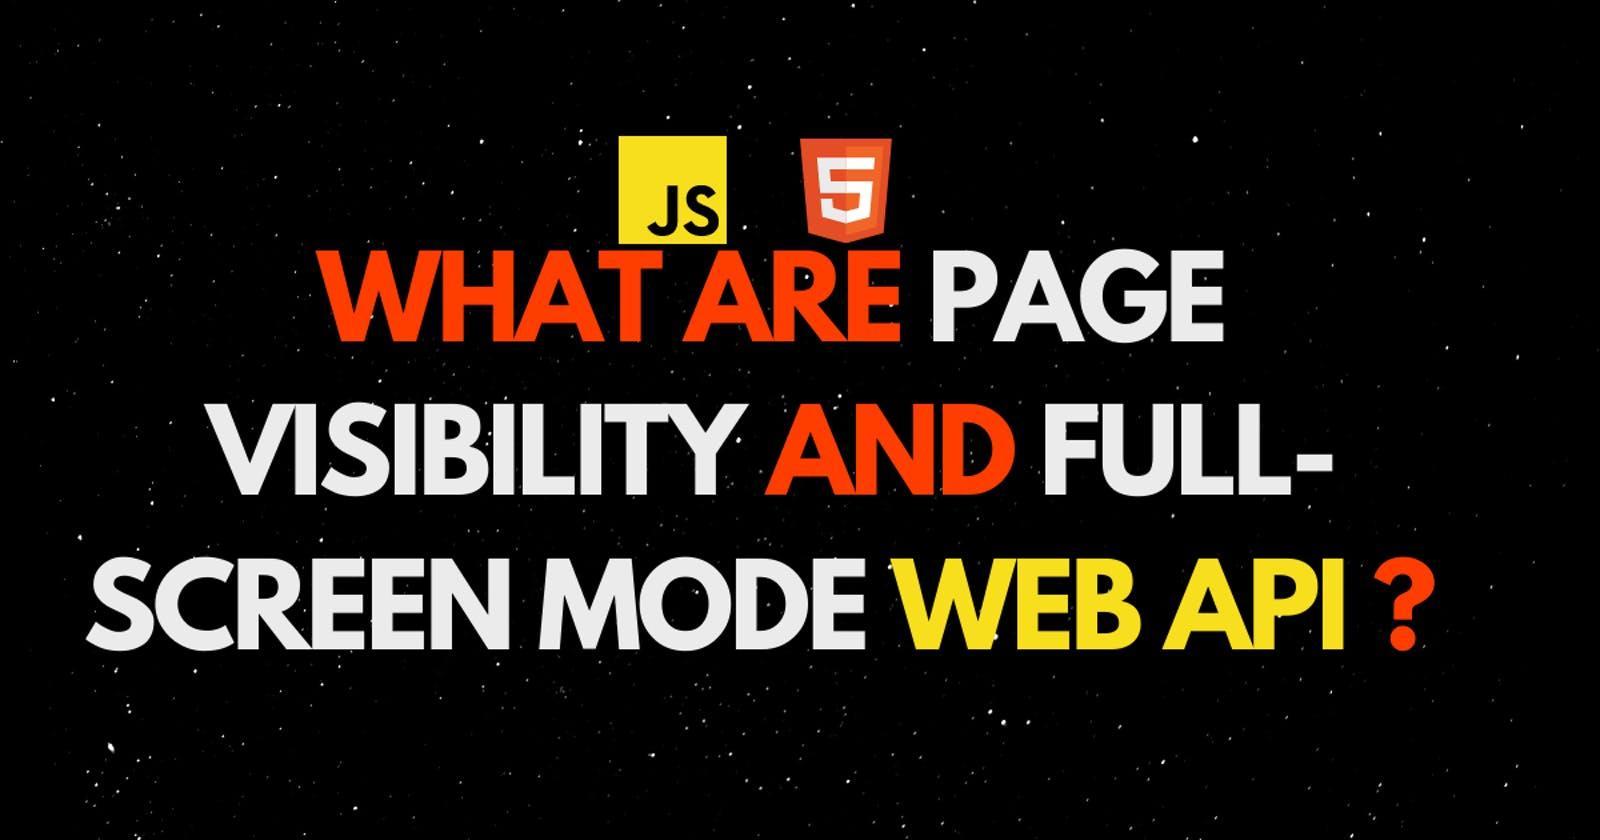 Page visibility and full-screen mode WEB API  | Web Development for Beginners